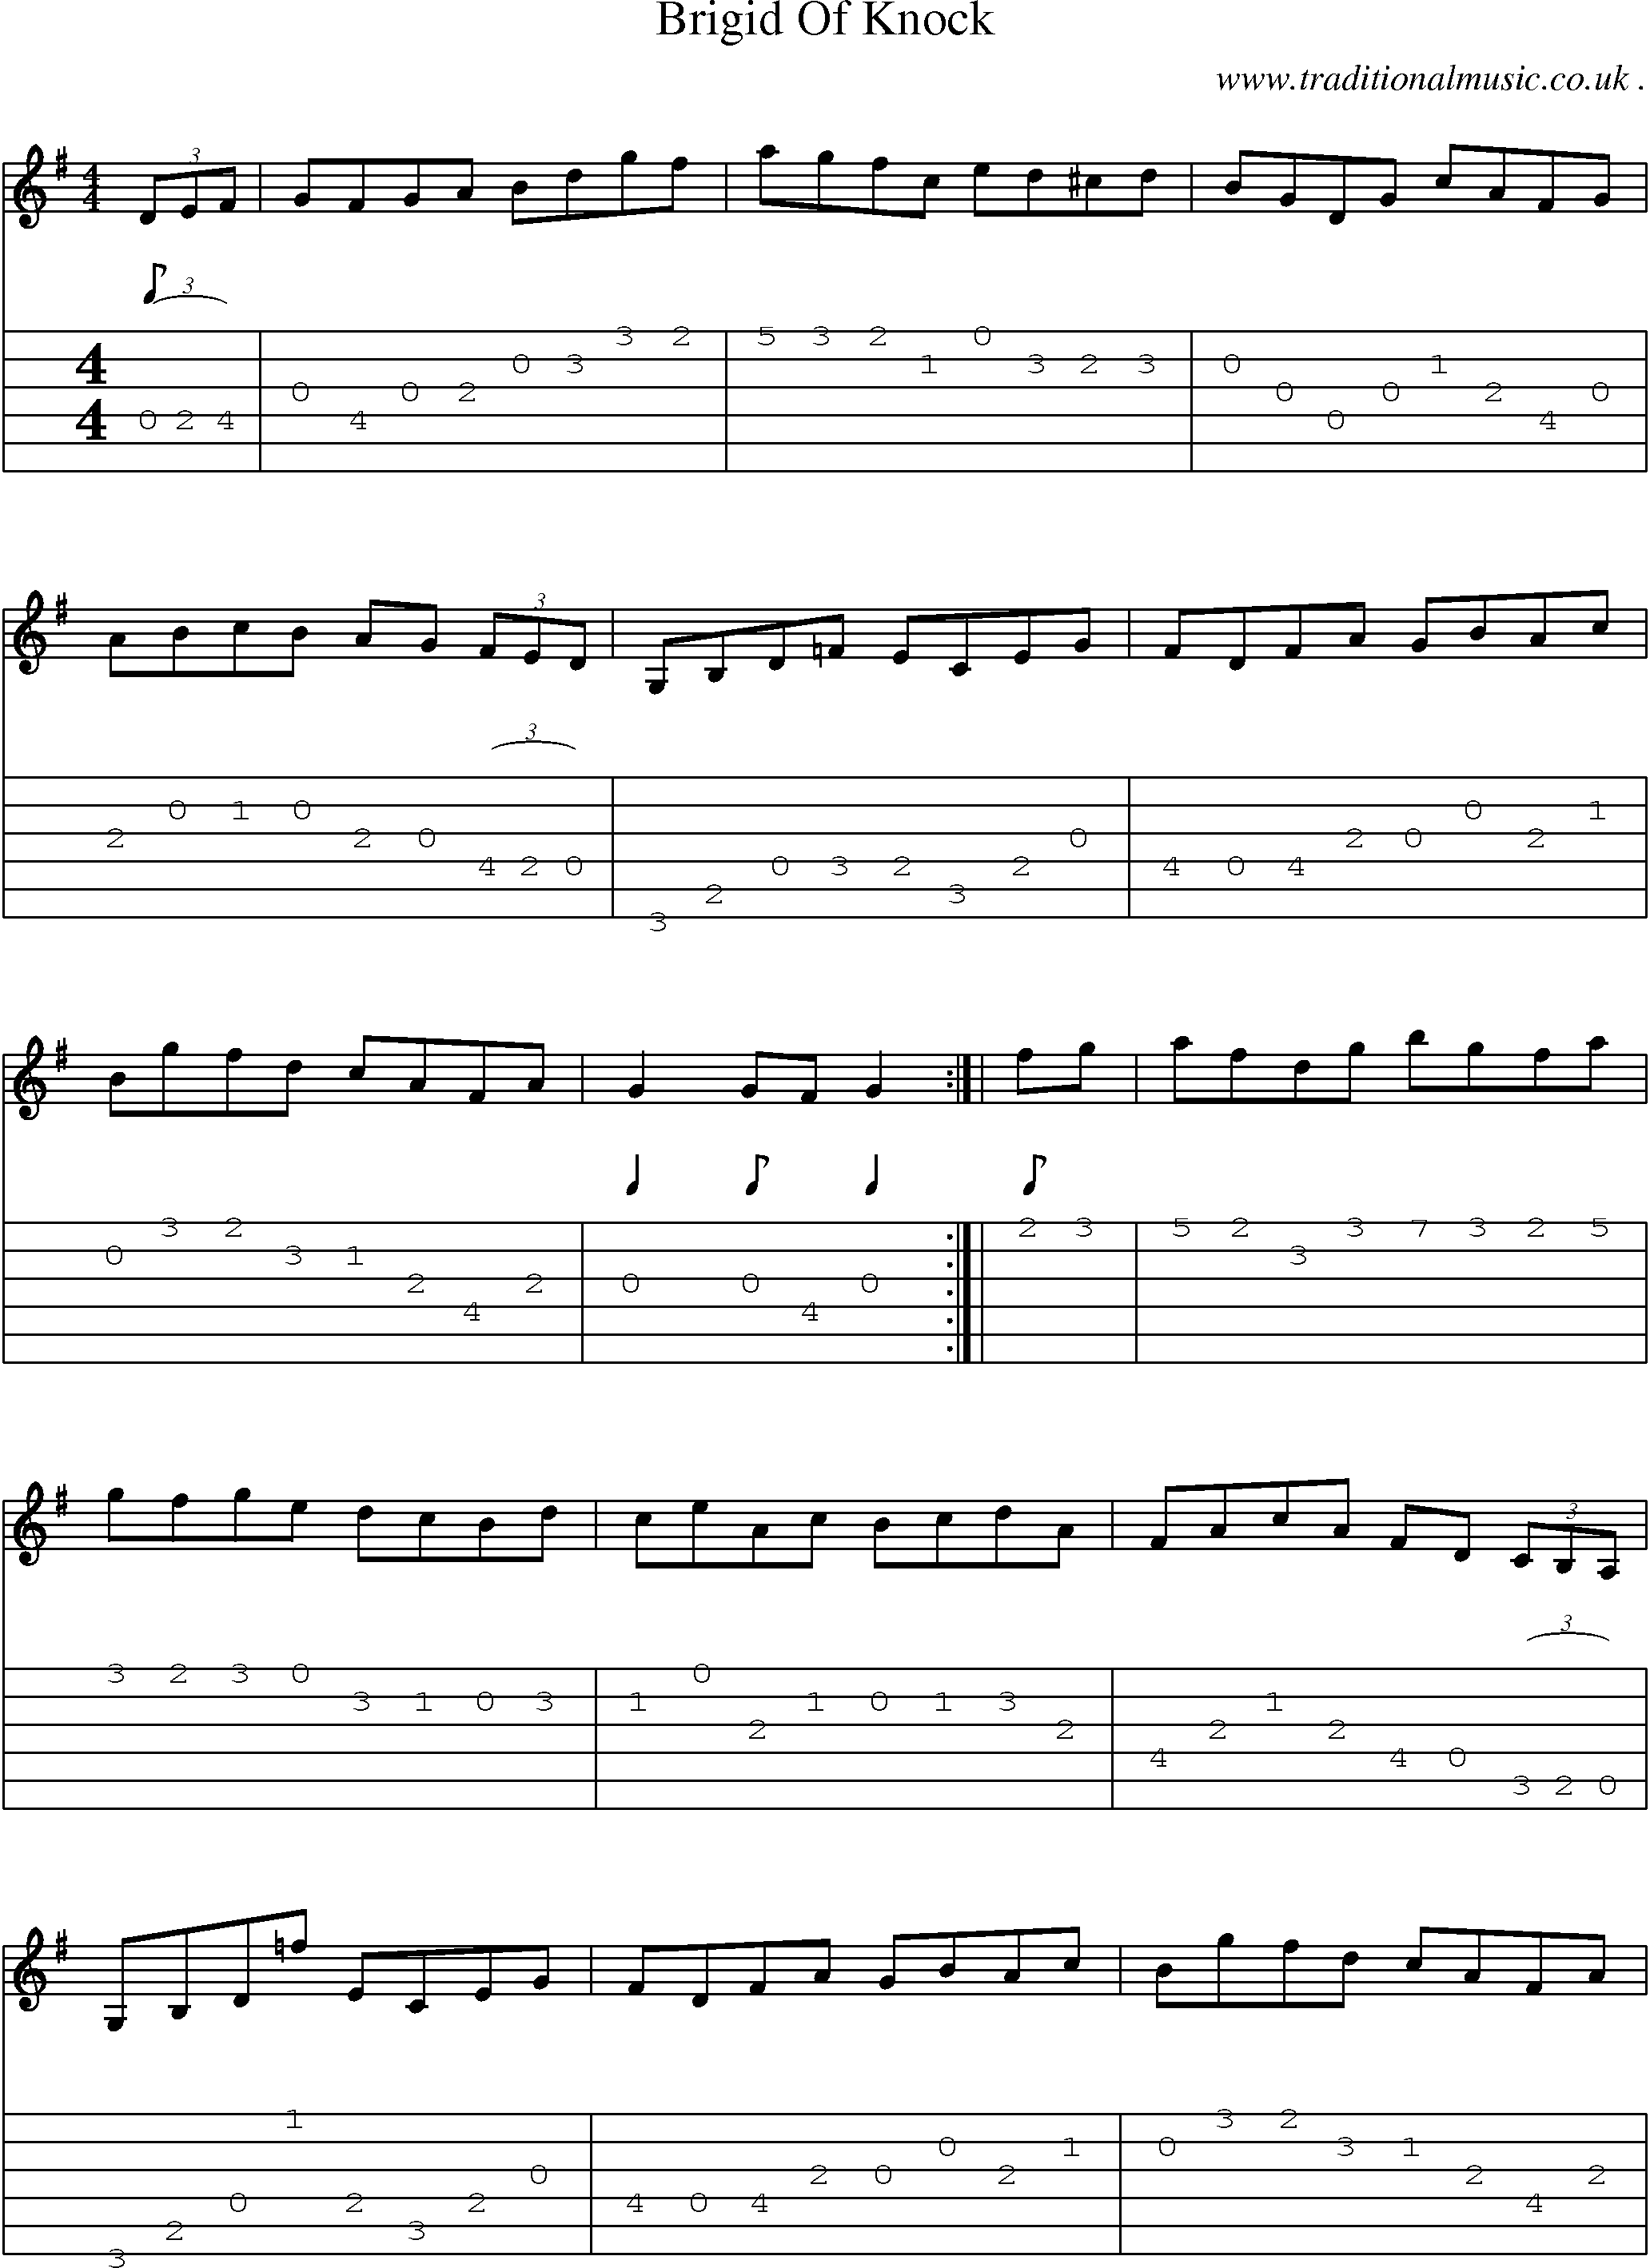 Sheet-Music and Guitar Tabs for Brigid Of Knock